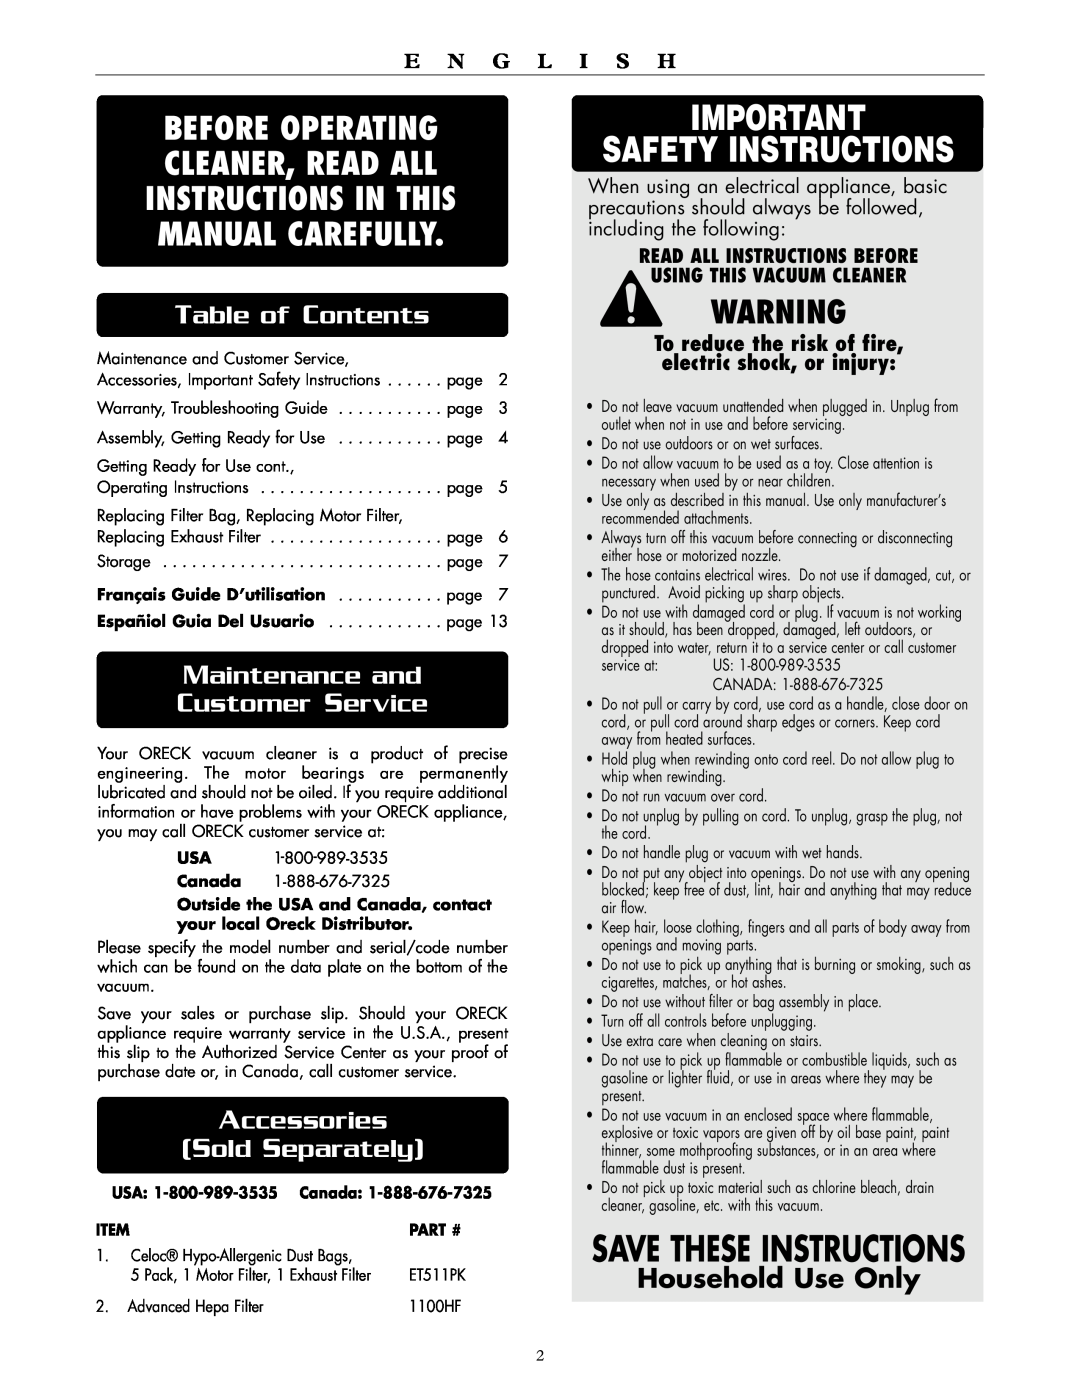 Oreck DTX 1100 Safety Instructions, Save These Instructions, Table of Contents, Maintenance and, Customer Service, Part # 